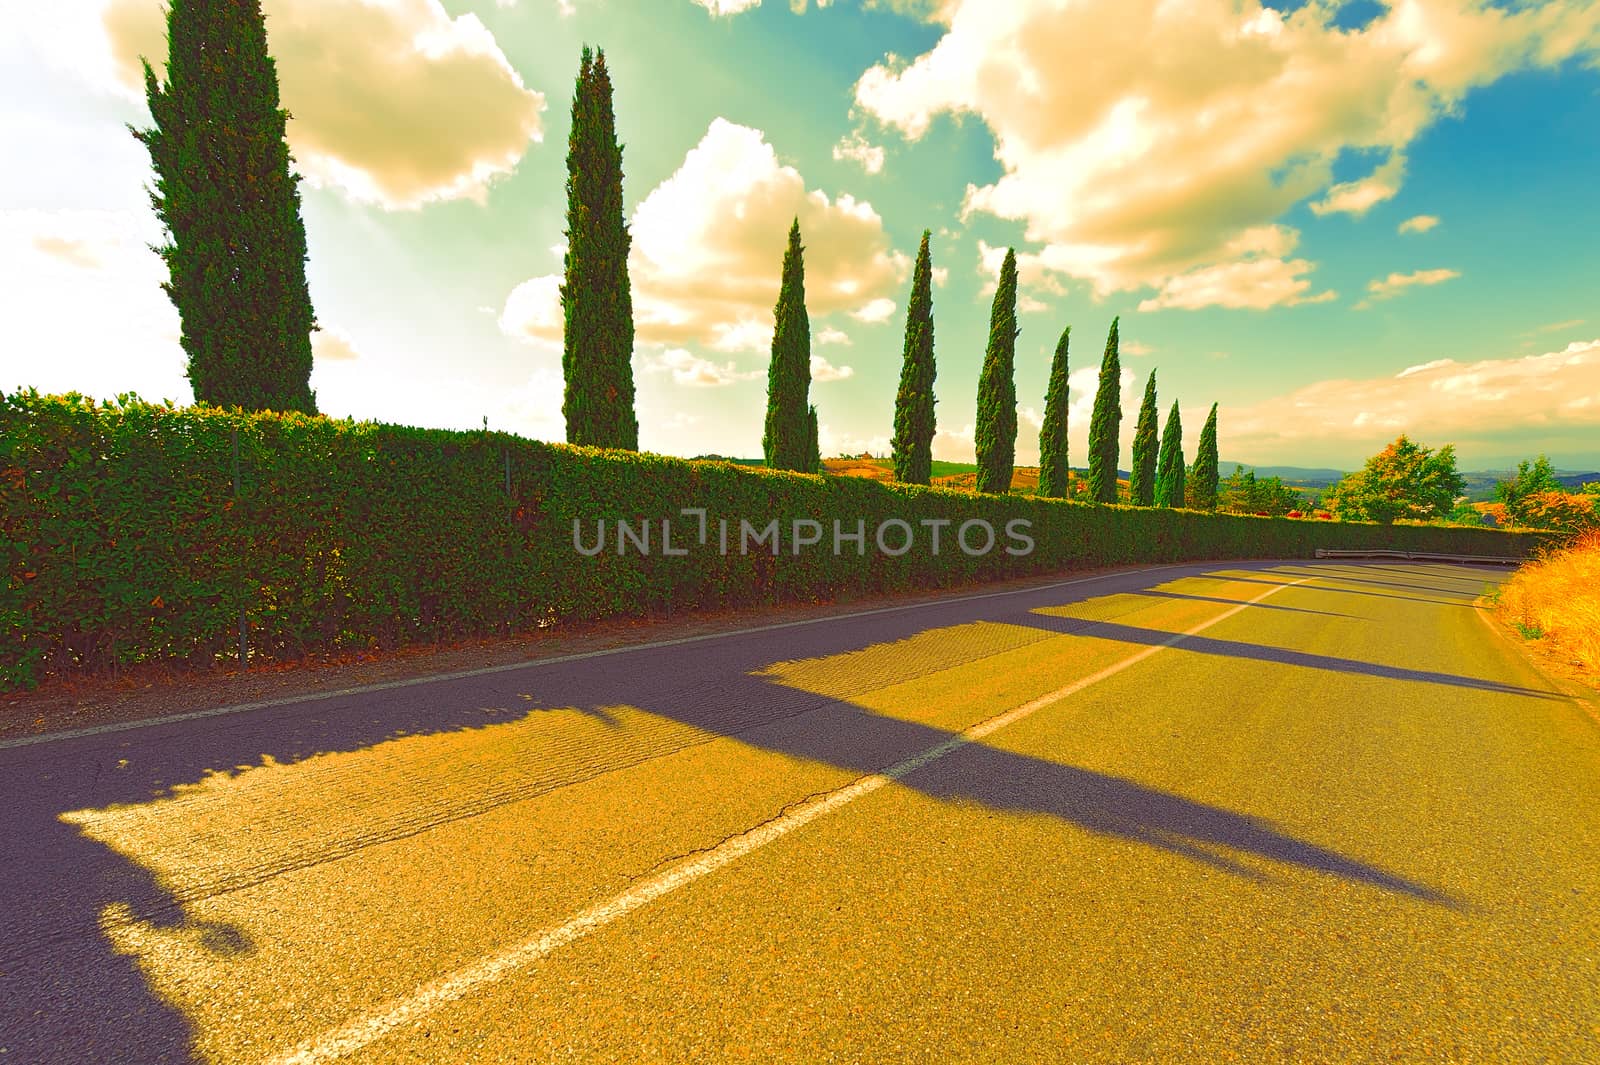 Asphalt Road and Cypresses at Sunset, Vintage Style Toned Picture 